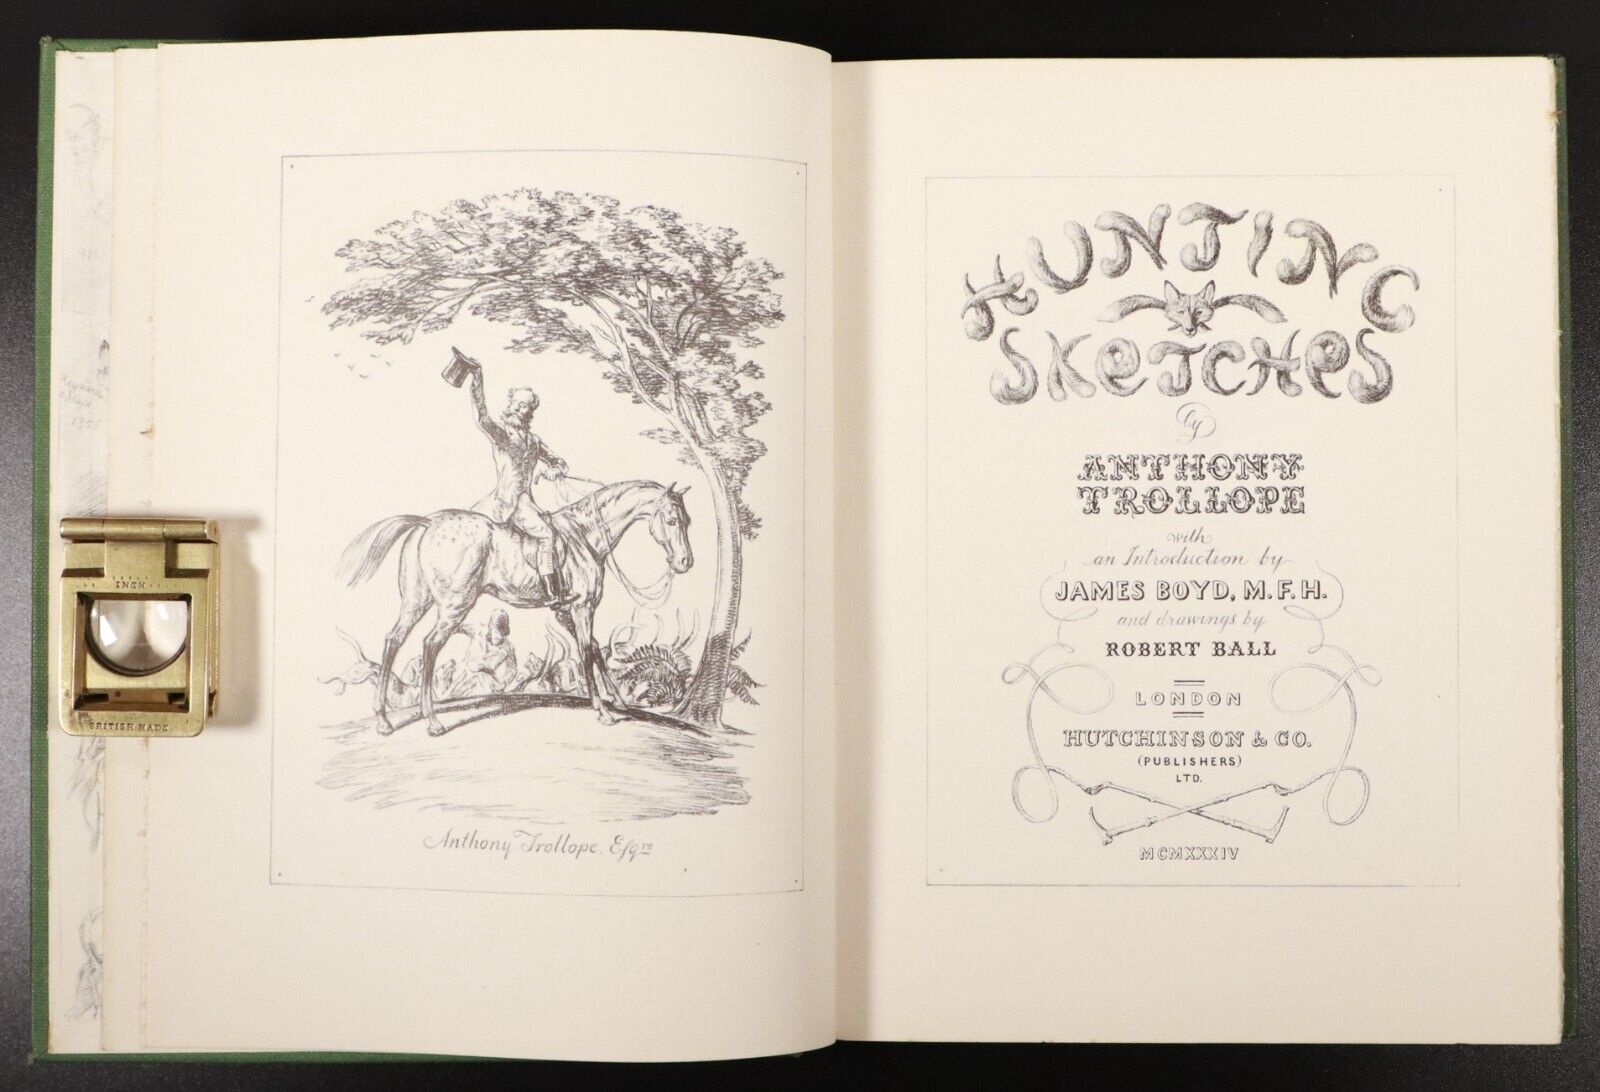 1934 Hunting Sketches by Anthony Trollope Antique British Literature & Art Book